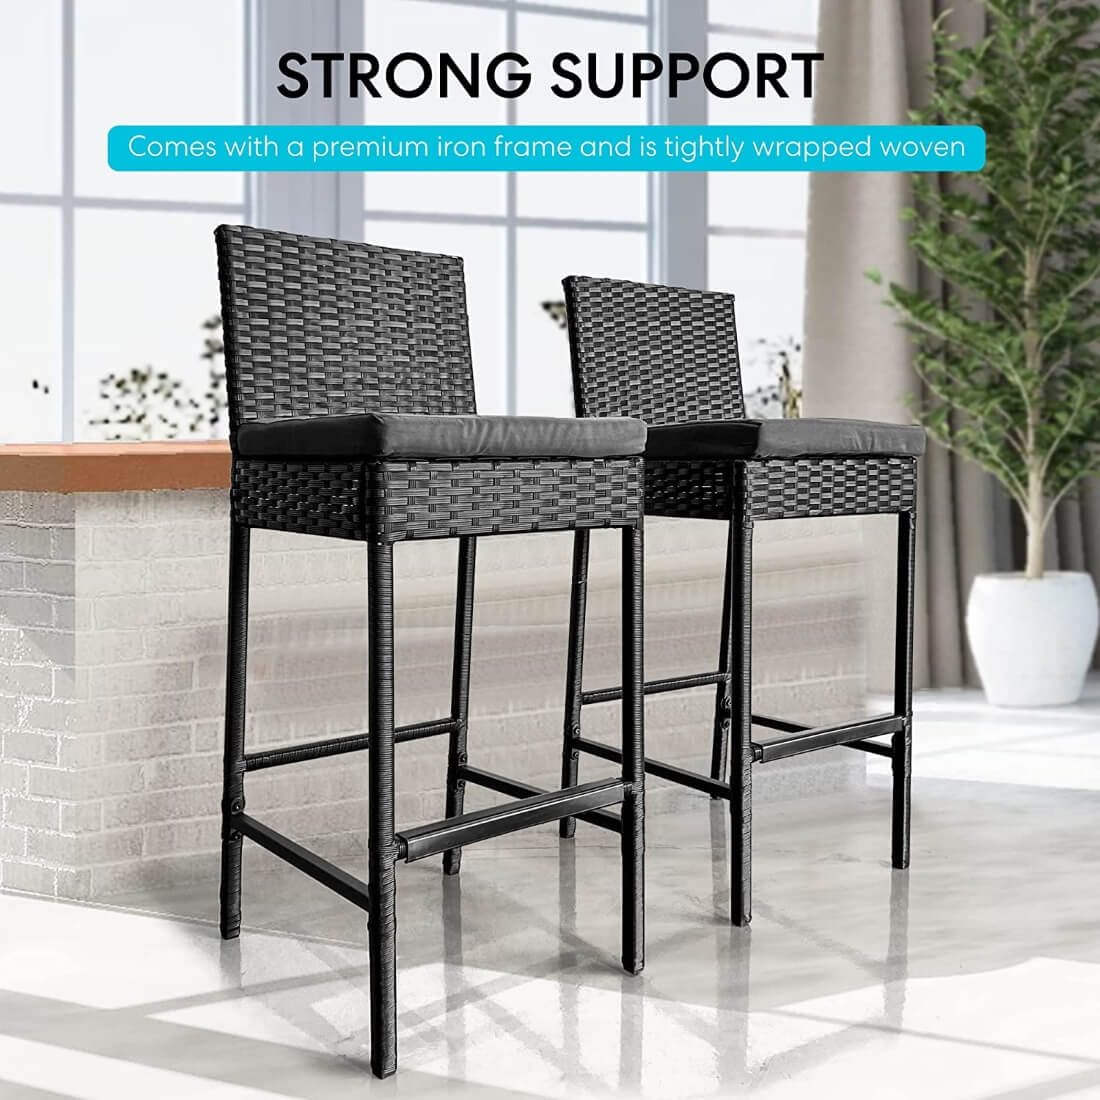 VIVOHOME 4 Packs Outdoor Wicker Barstool Patio Rattan Furniture with Cushions Black